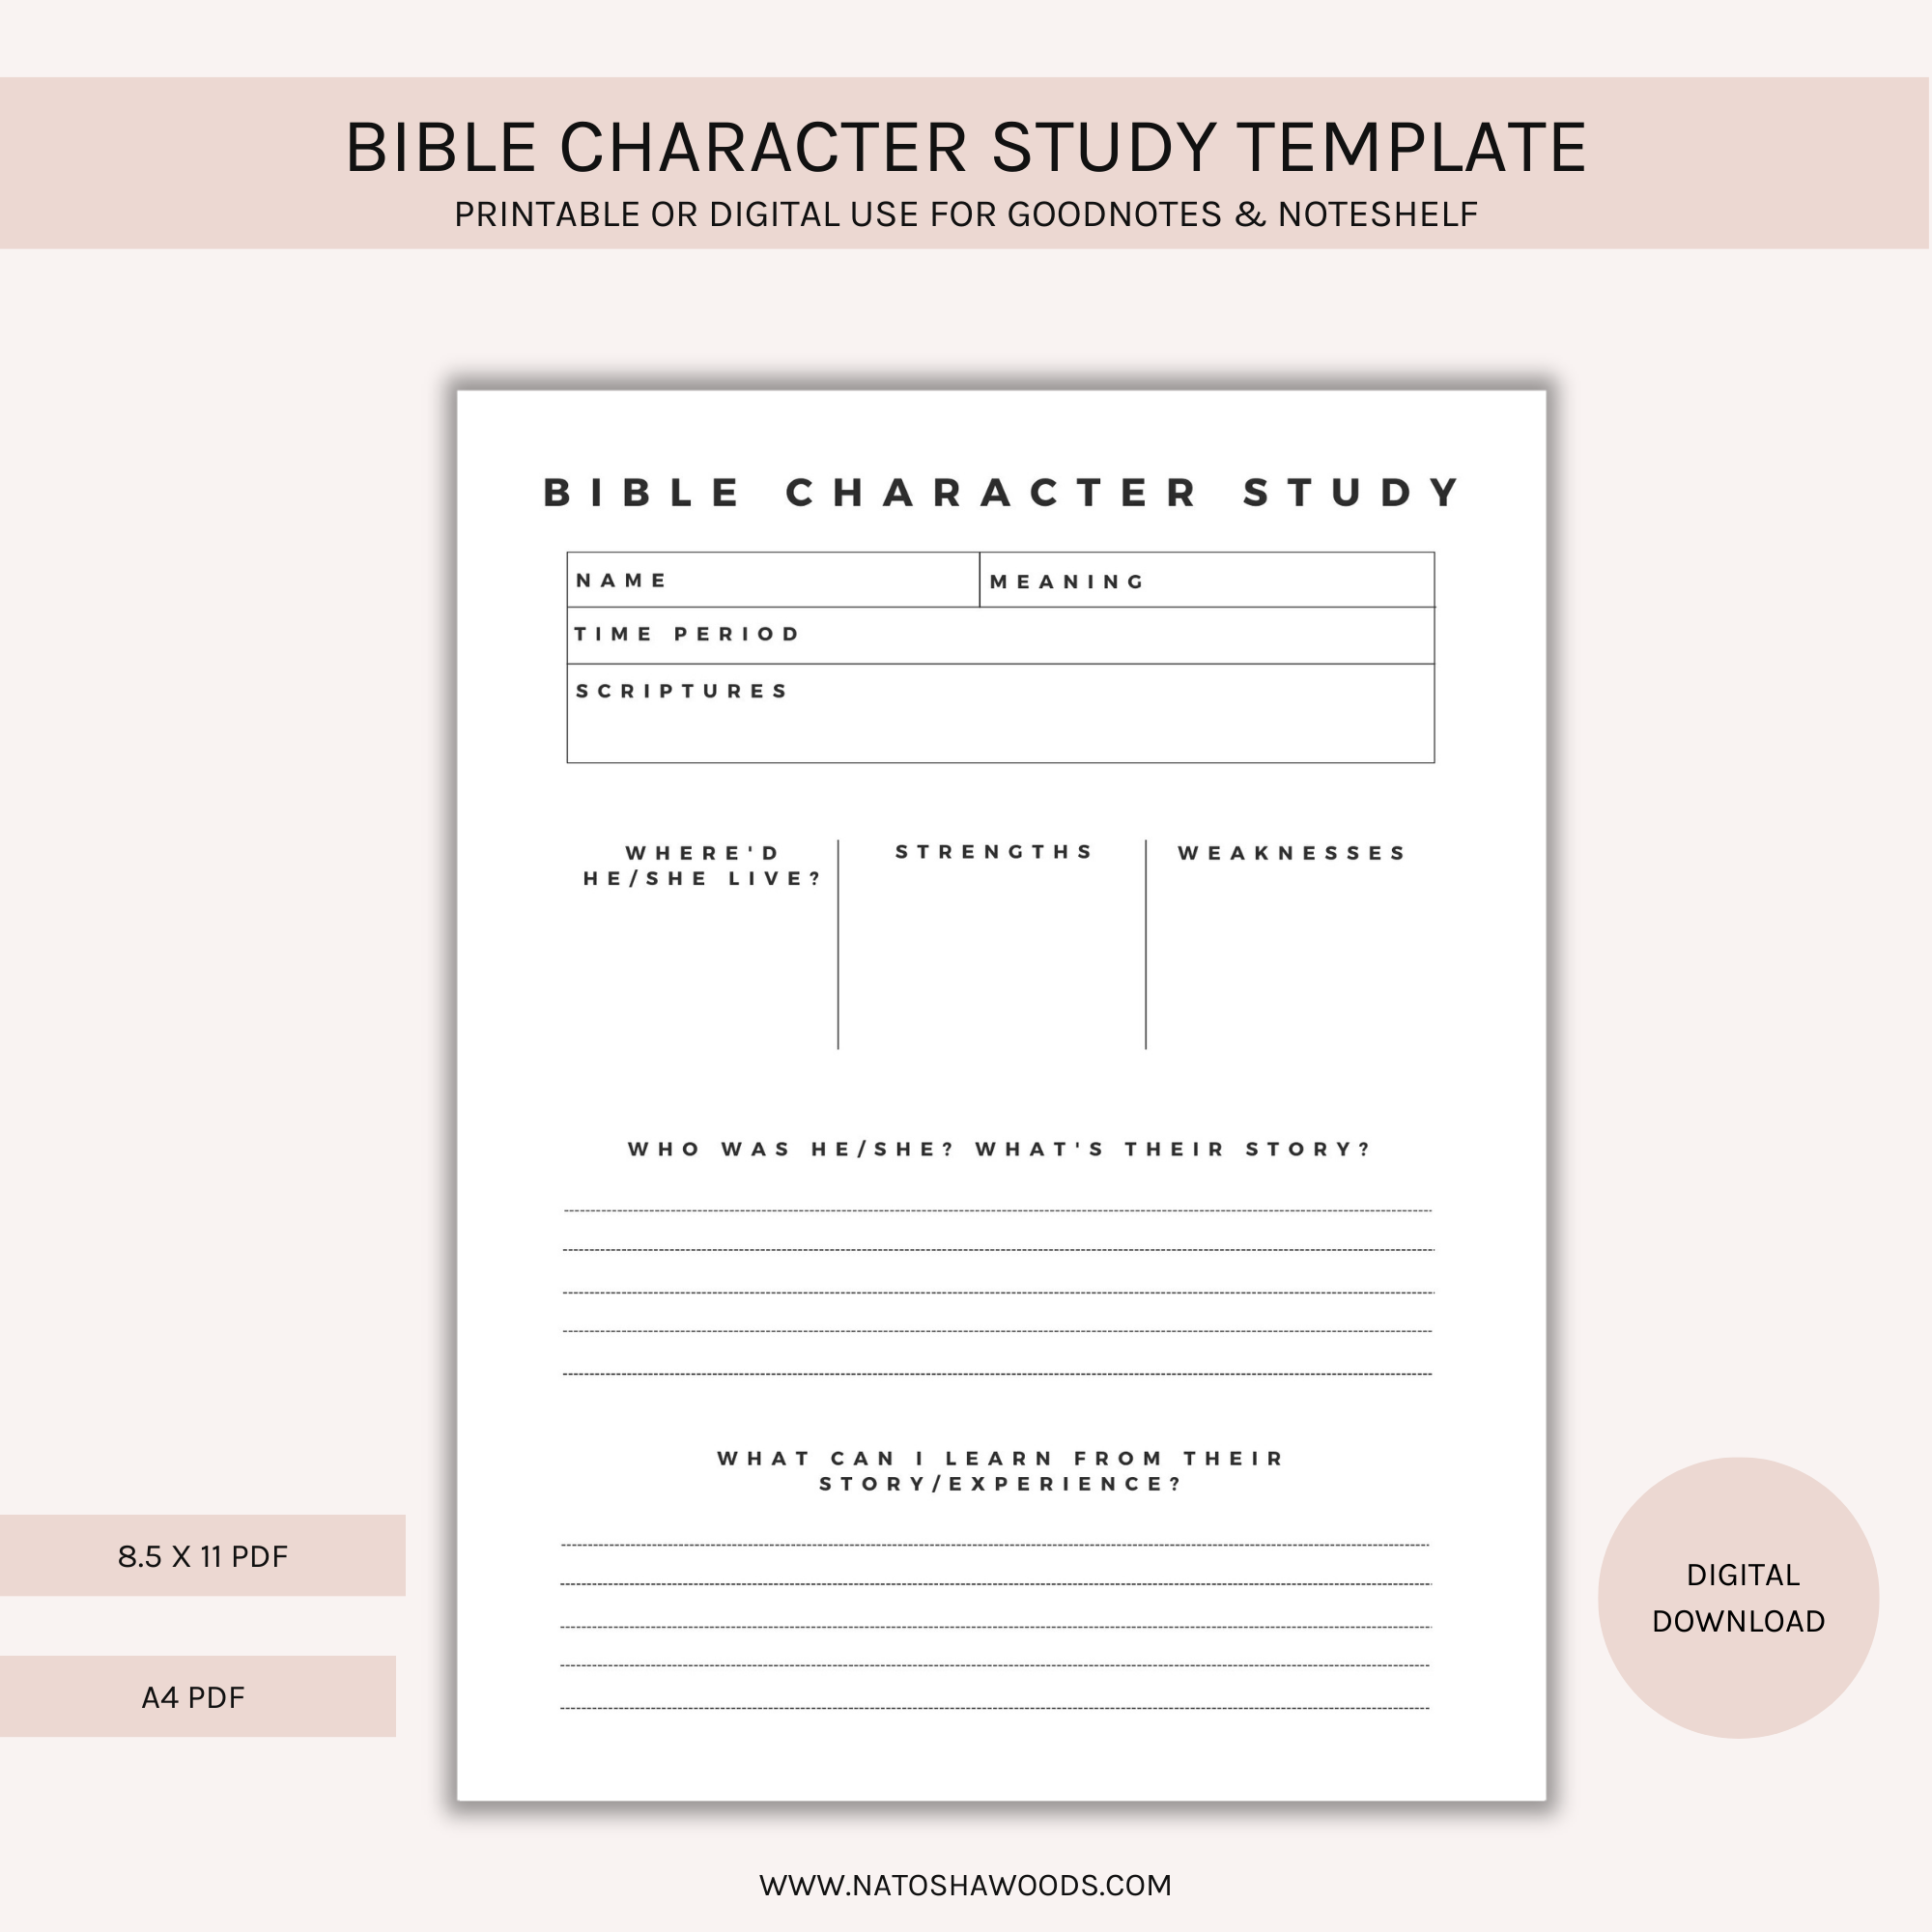 bible-character-study-template